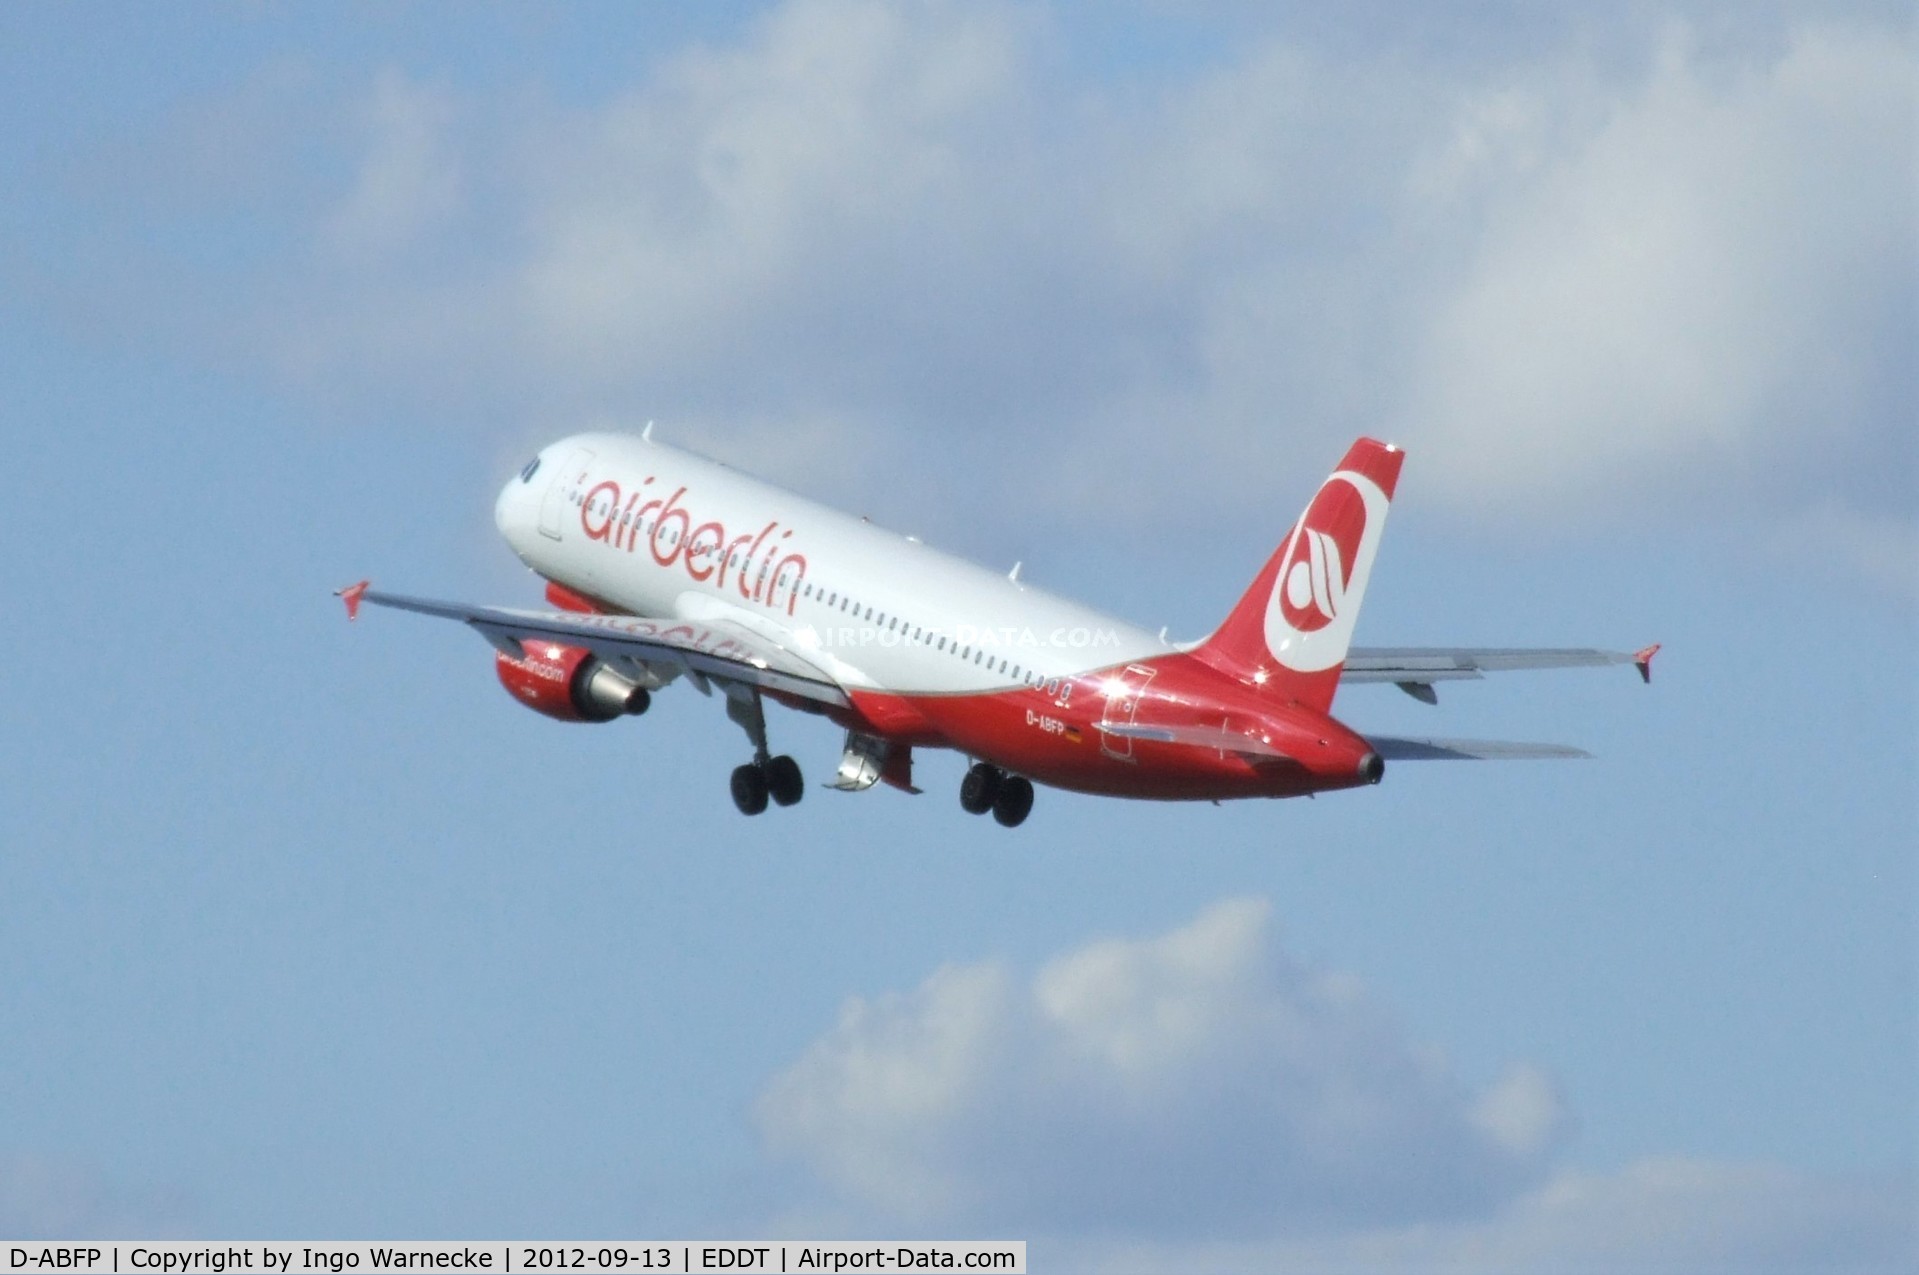 D-ABFP, 2011 Airbus A320-214 C/N 4606, Airbus A320-214 of airberlin at Berlin-Tegel airport